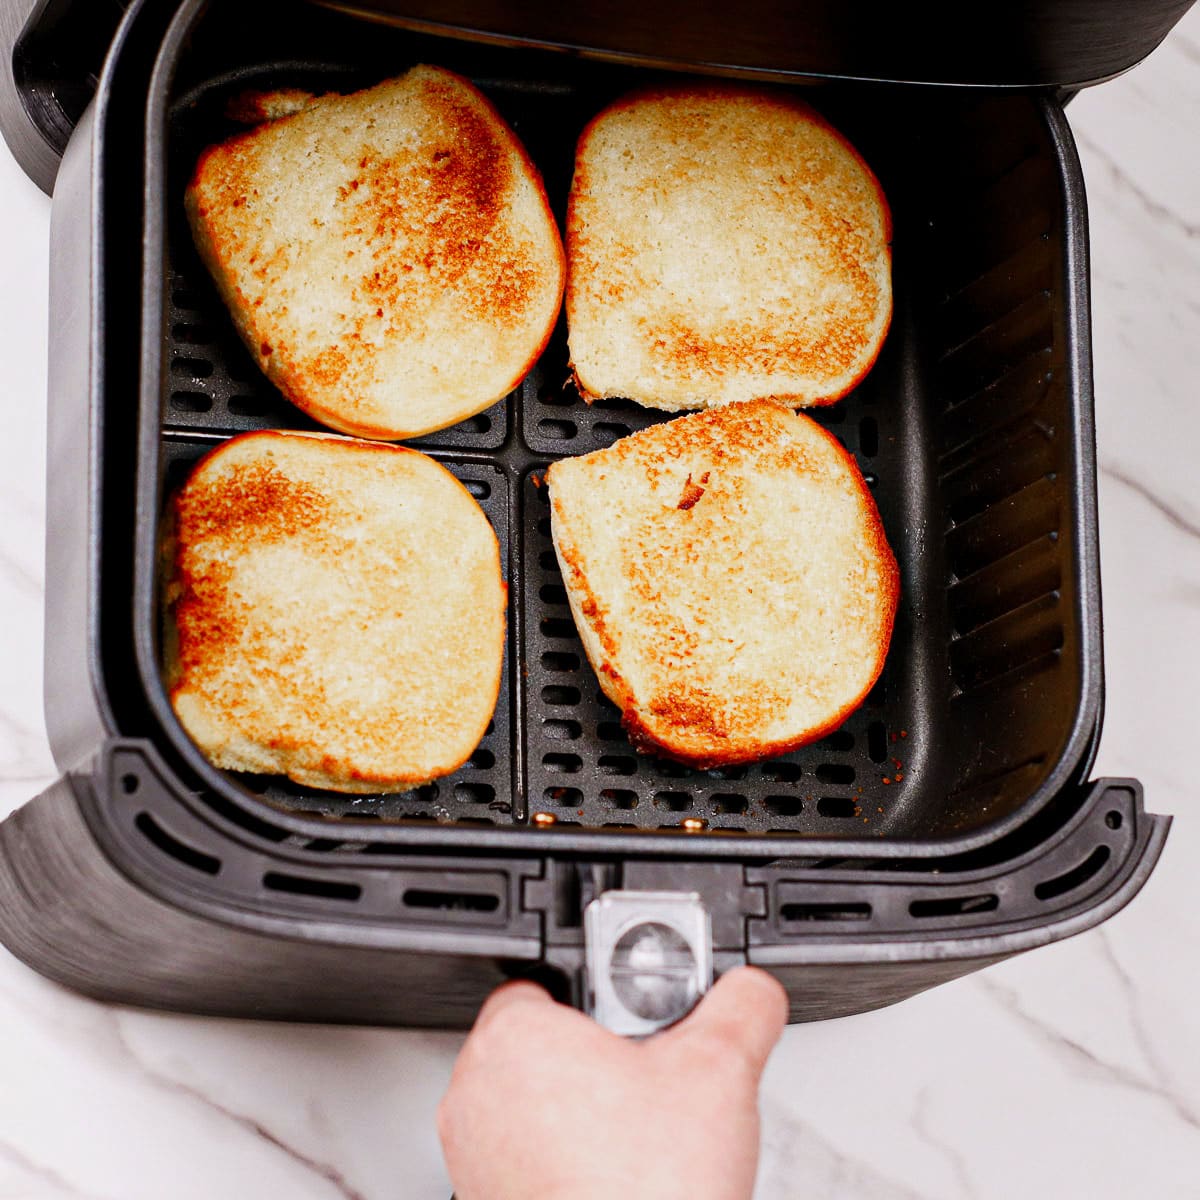 Step 5: Toasting burger buns in air fryer.